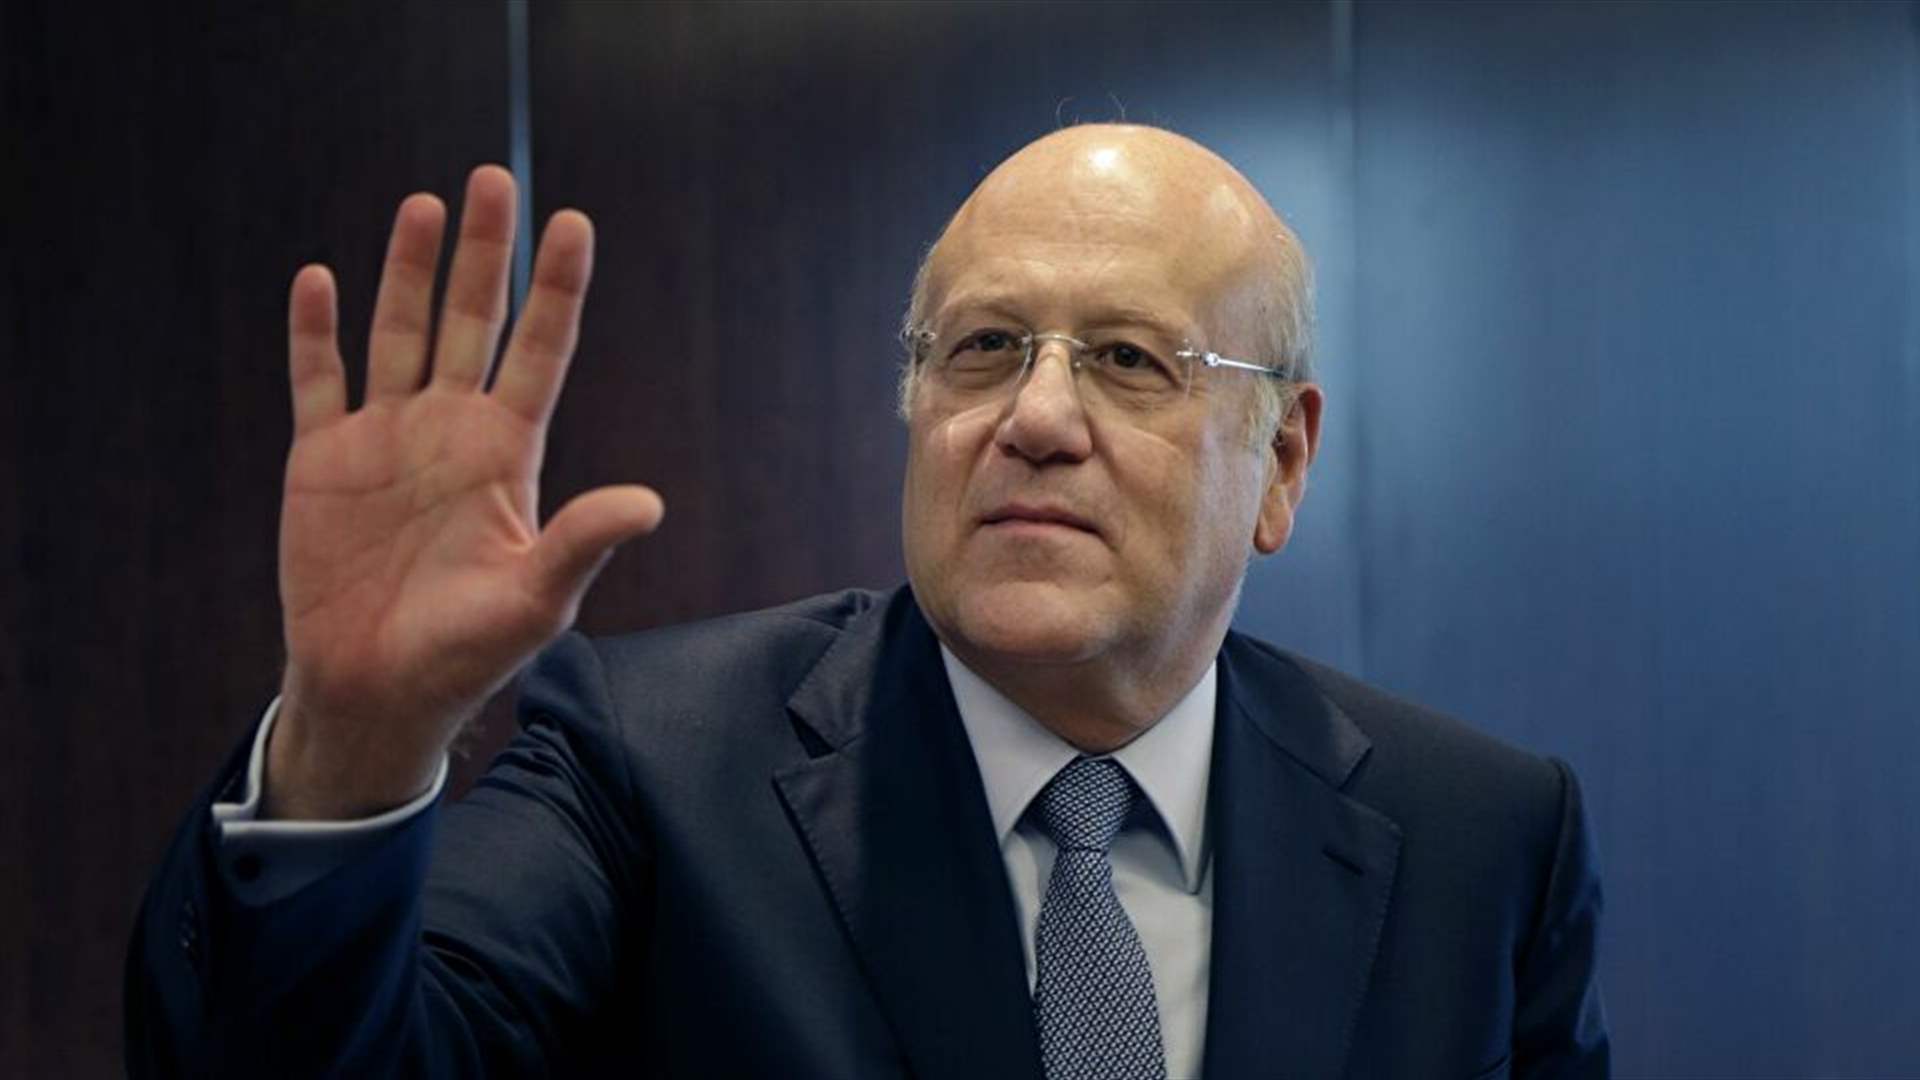 Caretaker Prime Minister Mikati&#39;s Regional Peace Initiative: From Plan to Action